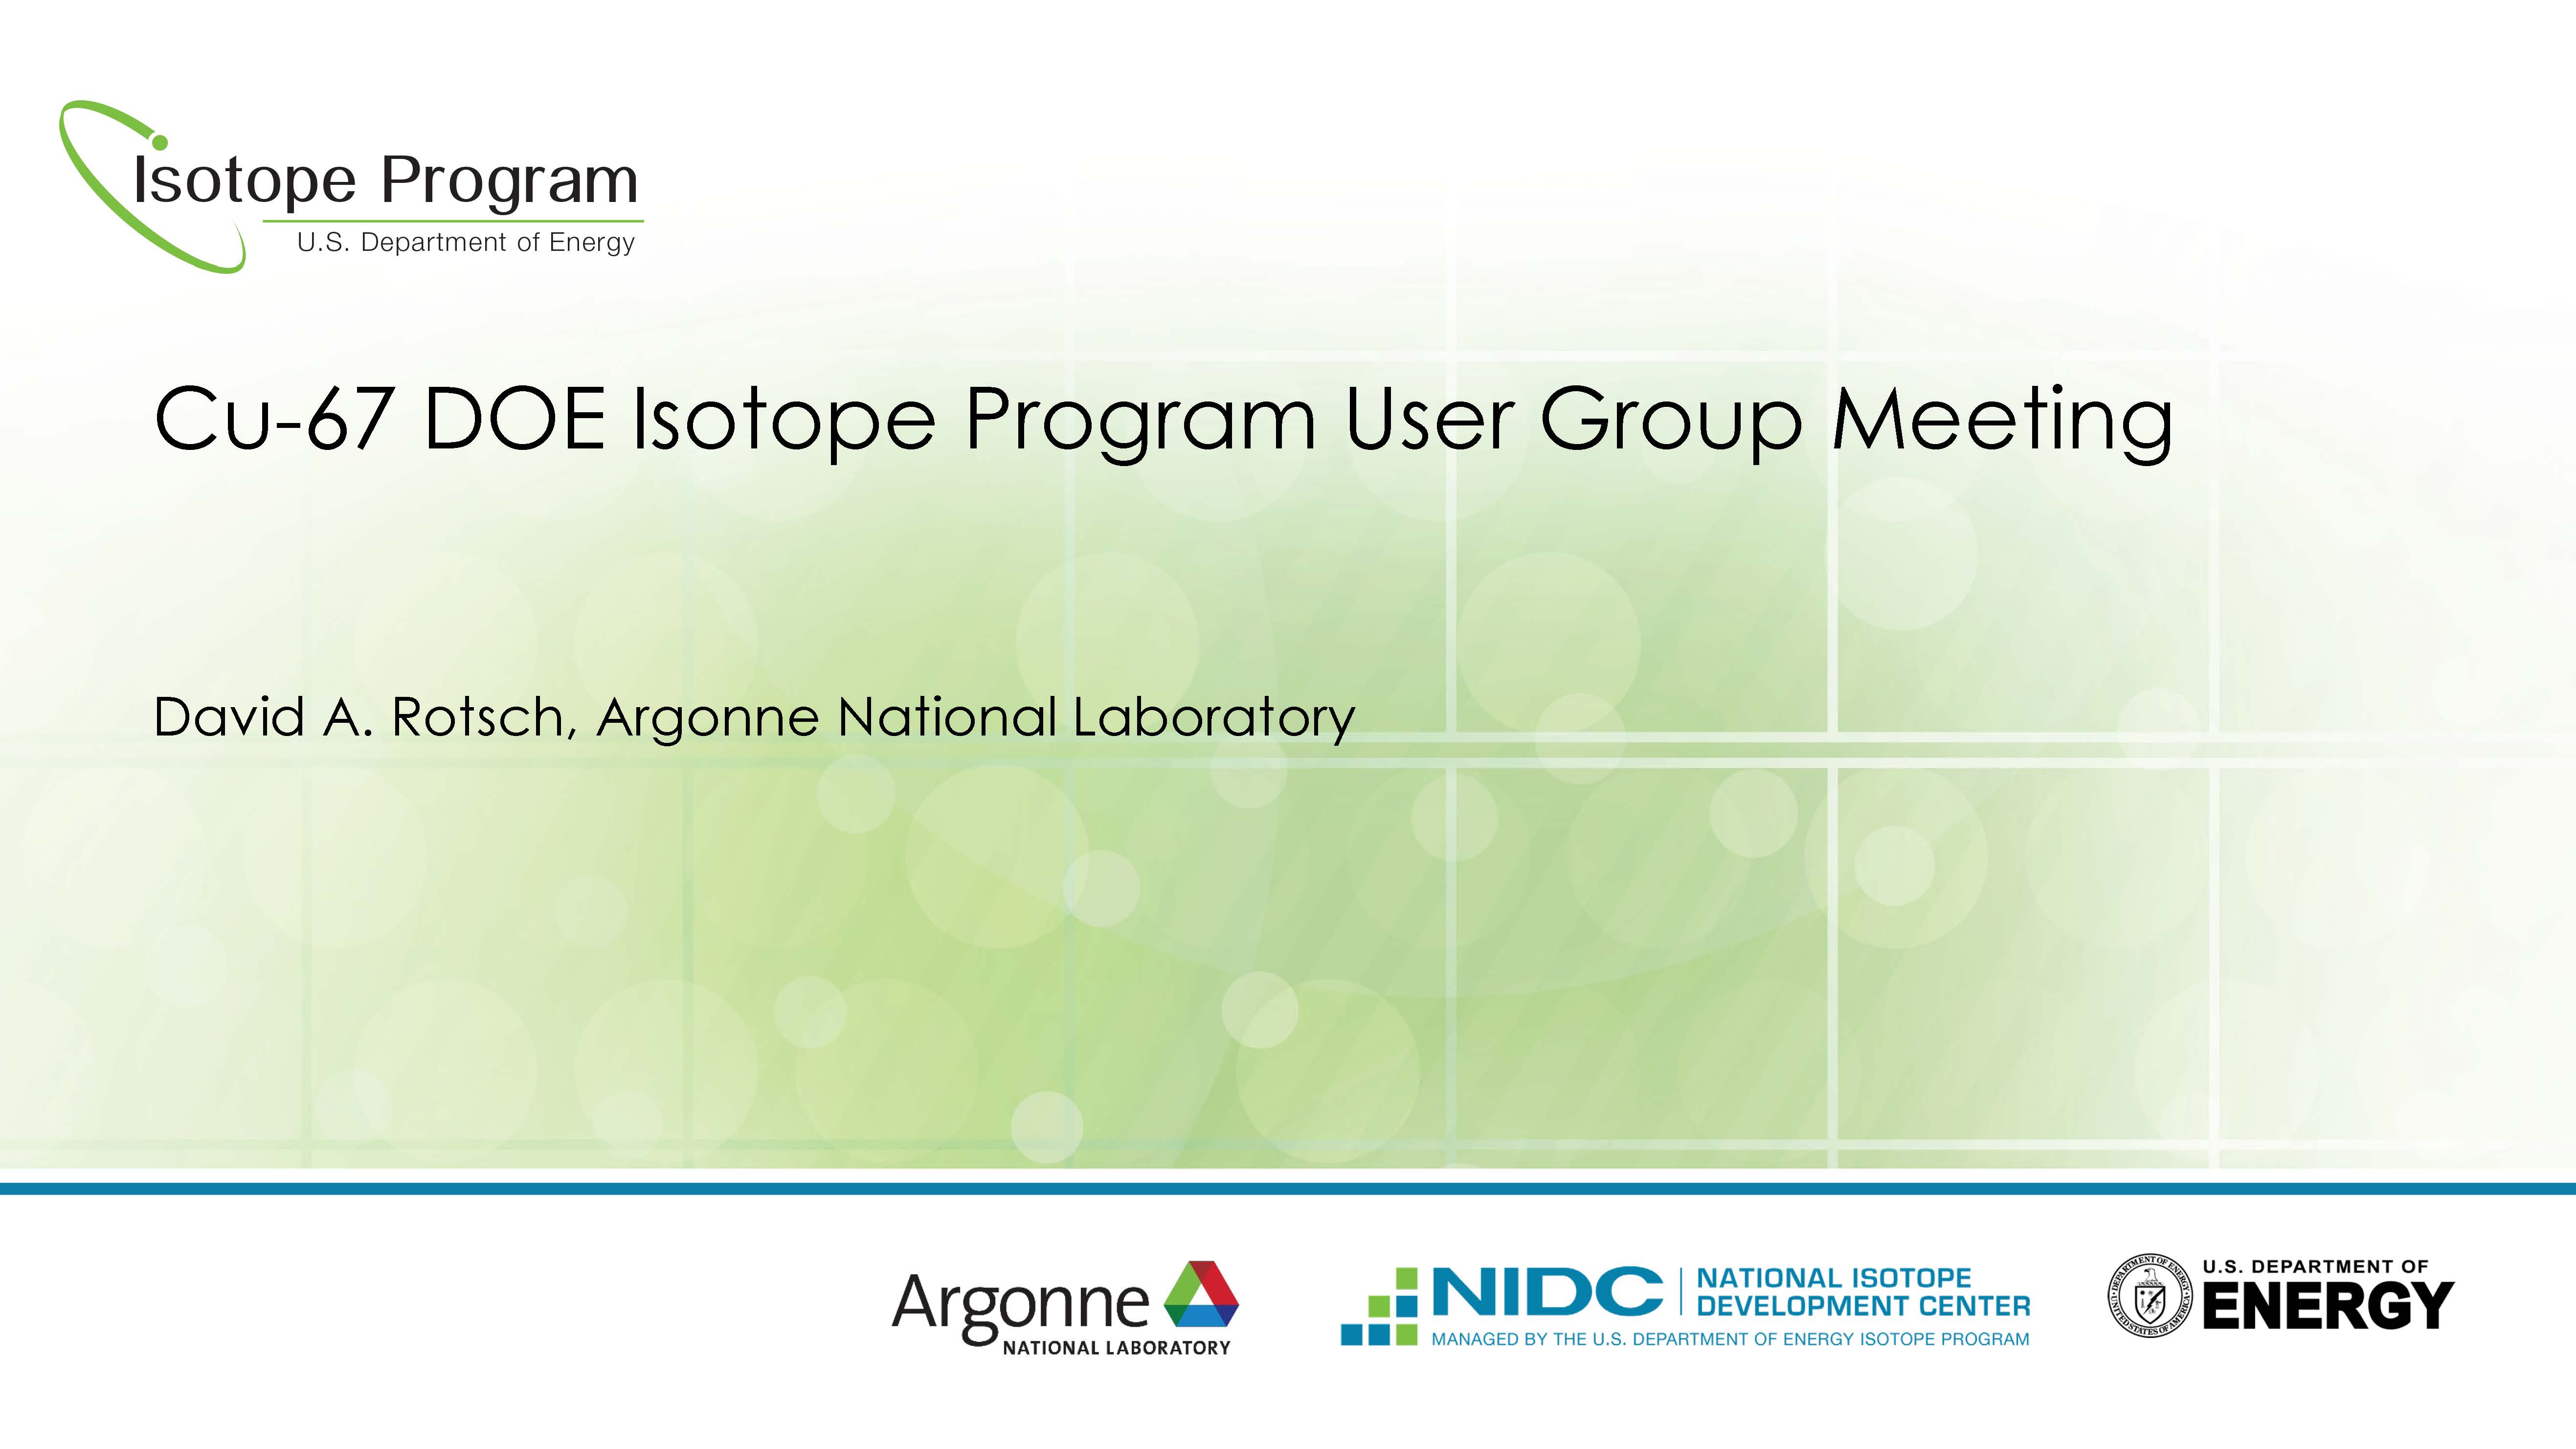 Cu-67 DOE Isotope Program User Group Meeting by Dr. David Rotsch, Argonne National Laboratory